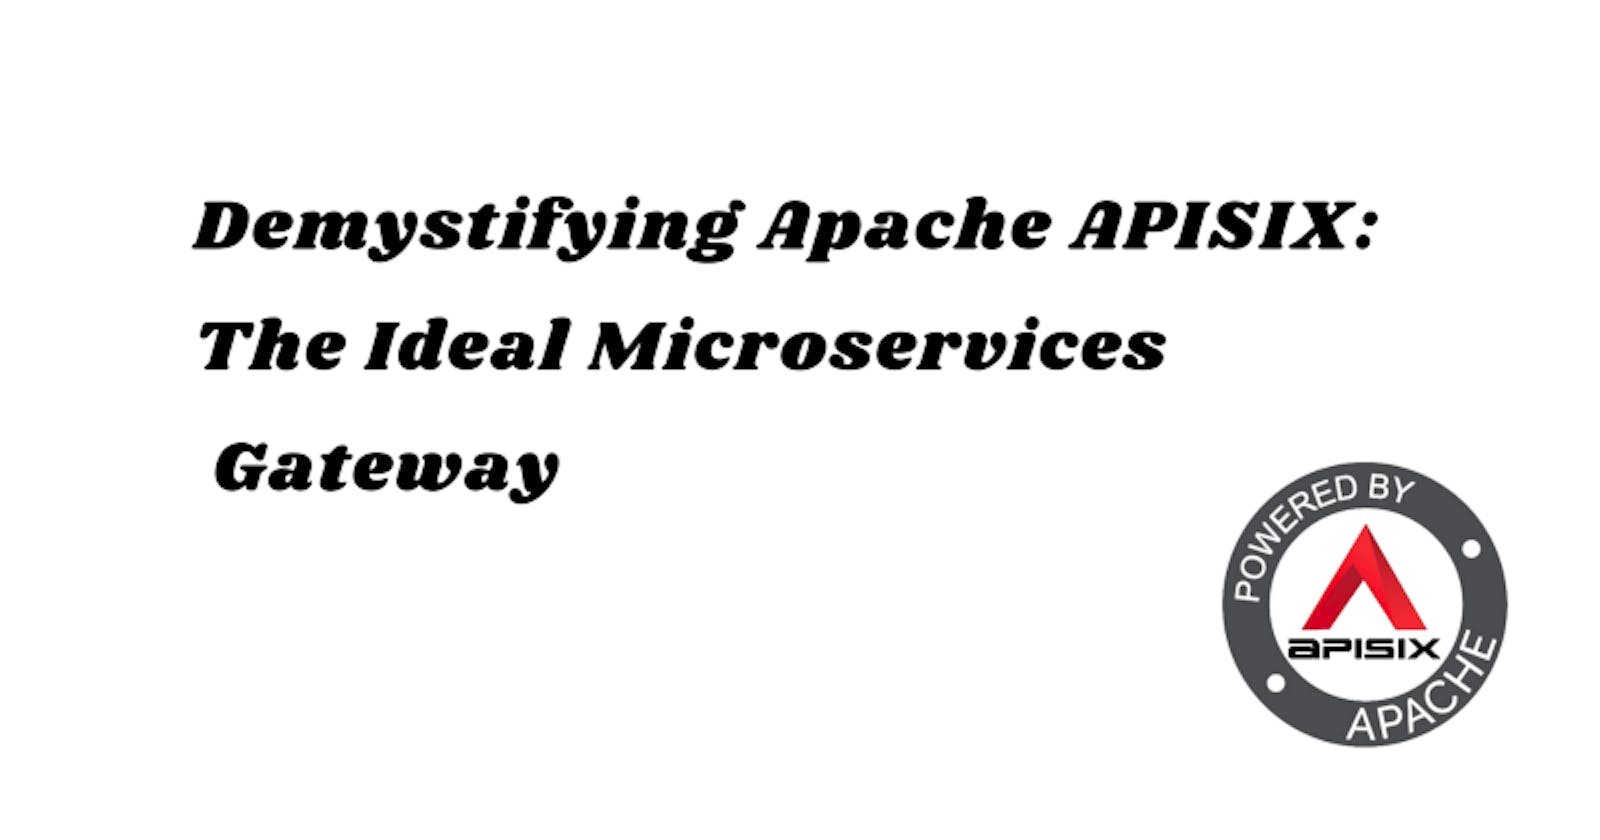 Demystifying Apache APISIX: The Ideal Microservices Gateway